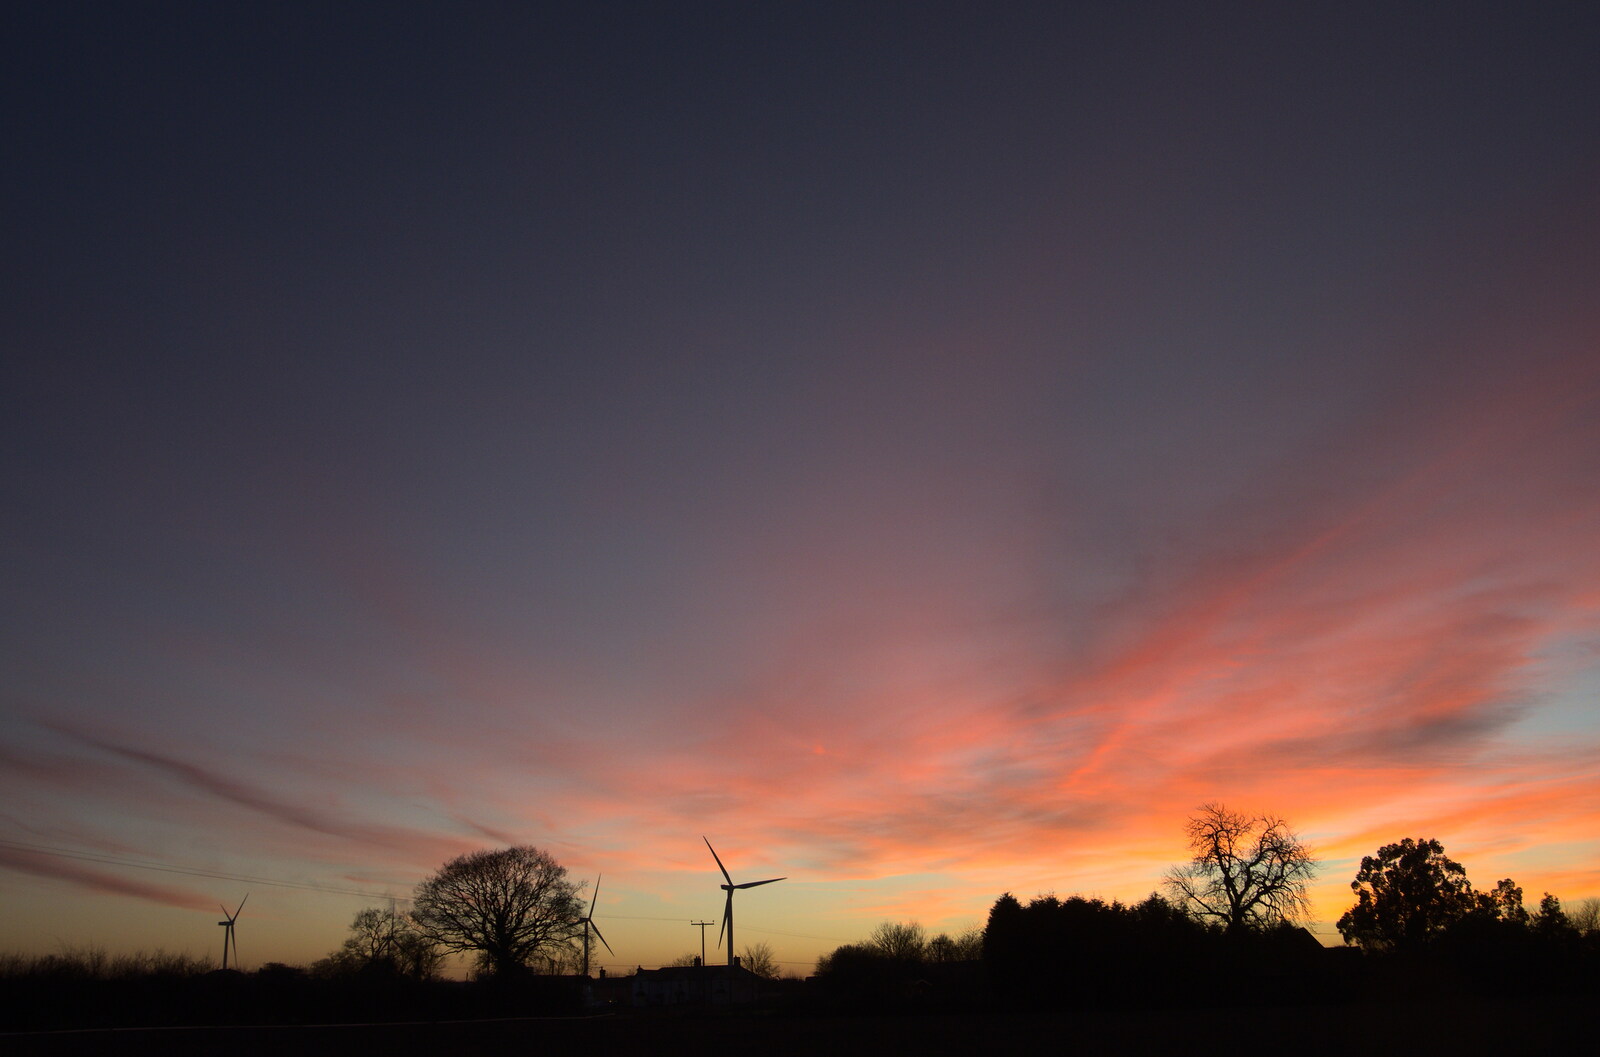 A nice sunset over the wind turbines from A Visit to Blickling Hall, Aylsham, Norfolk - 9th January 2022